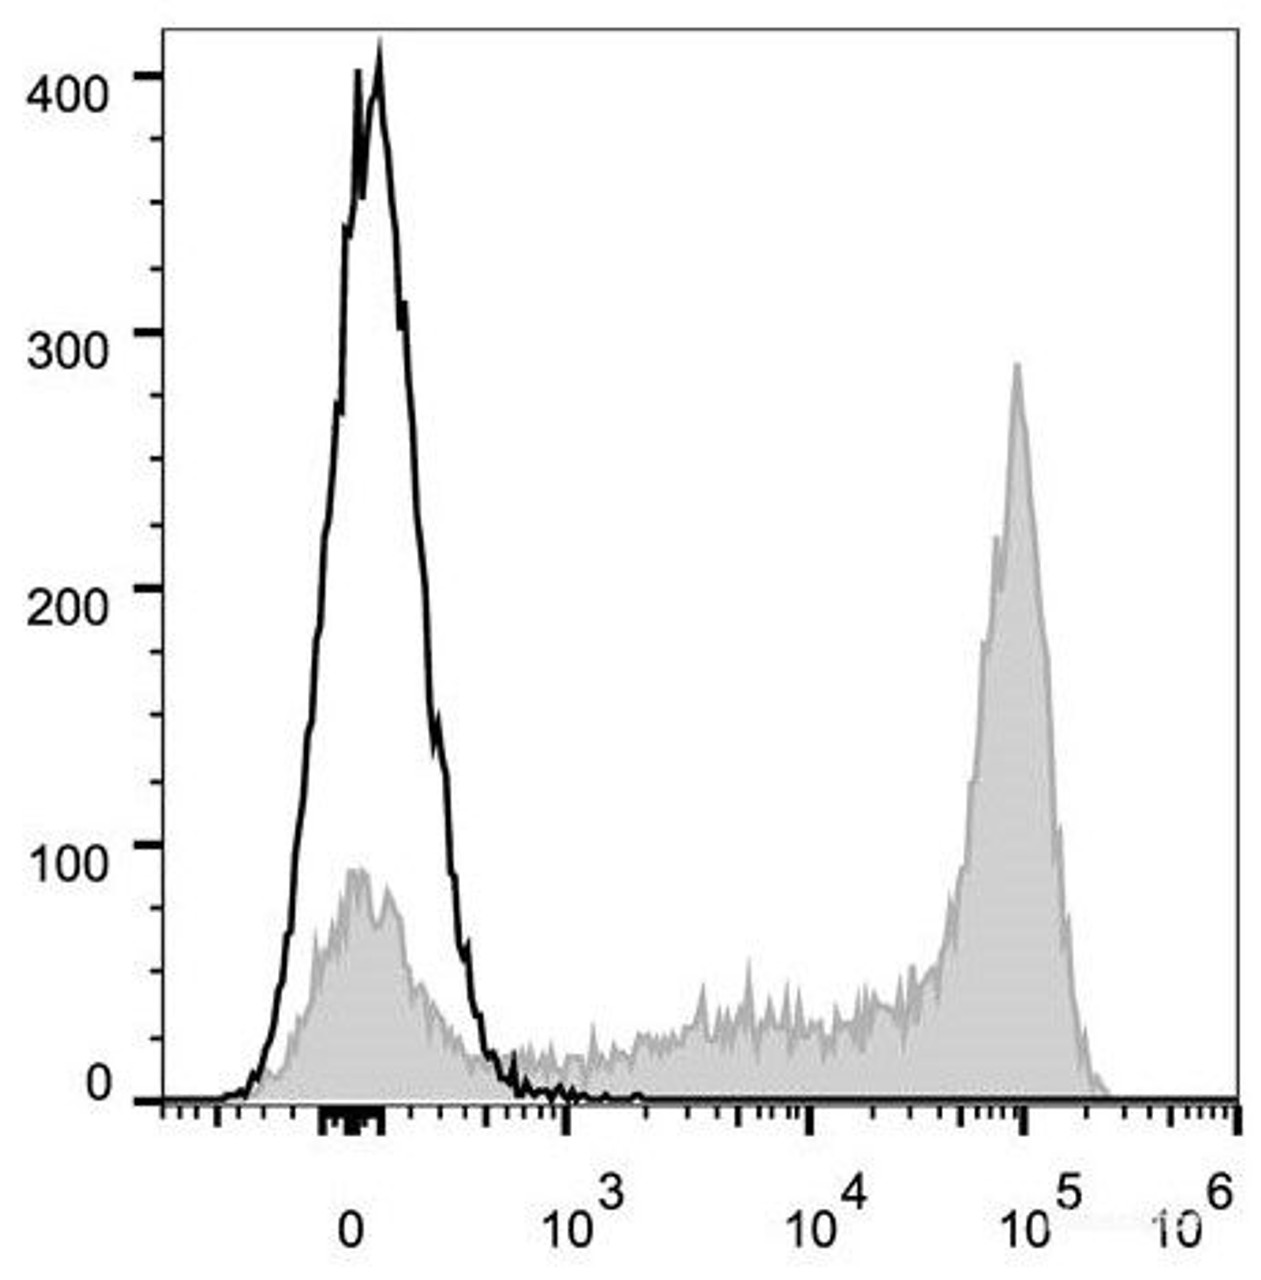 C57BL/6 murine bone marrow cells are stained with AF647 Anti-Mouse Ly6G Antibody[Used at .5 μg/1<sup>6</sup> cells dilution](filled gray histogram). Unstained bone marrow cells (empty black histogram) are used as control.